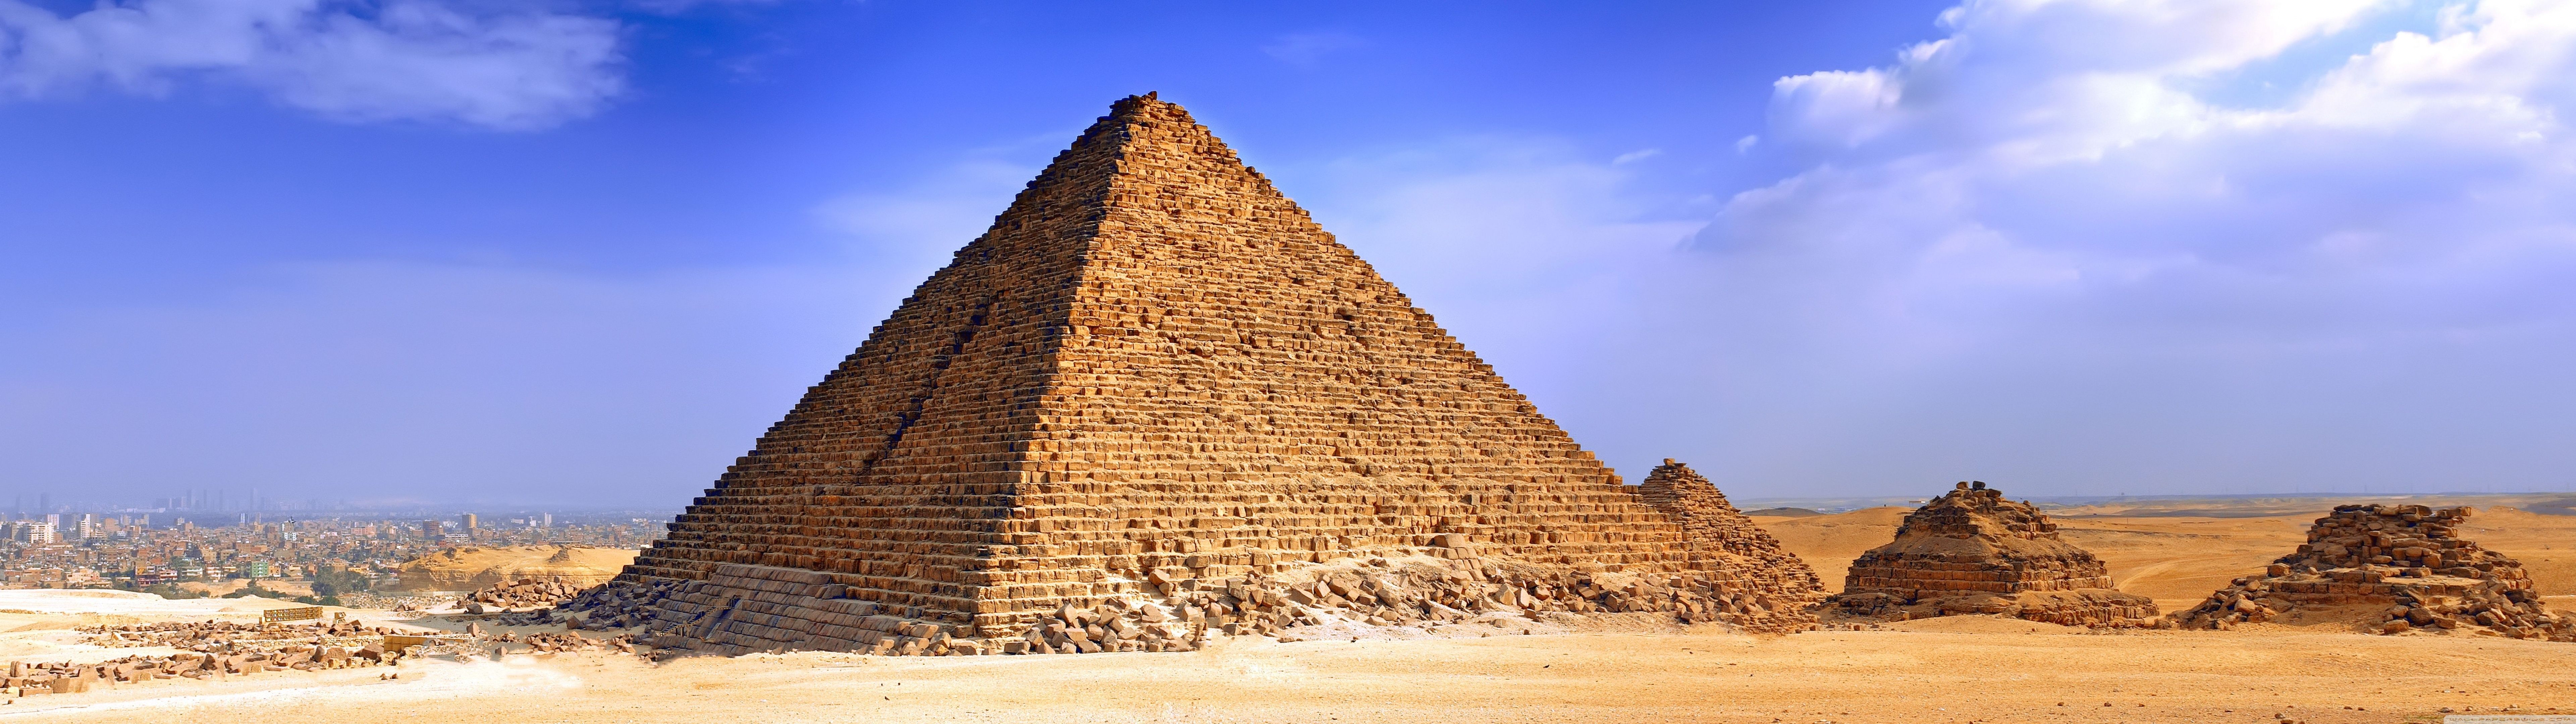 Egypt Pyramid Ultra HD Desktop Background Wallpaper for: Multi Display, Dual Monitor, Tablet